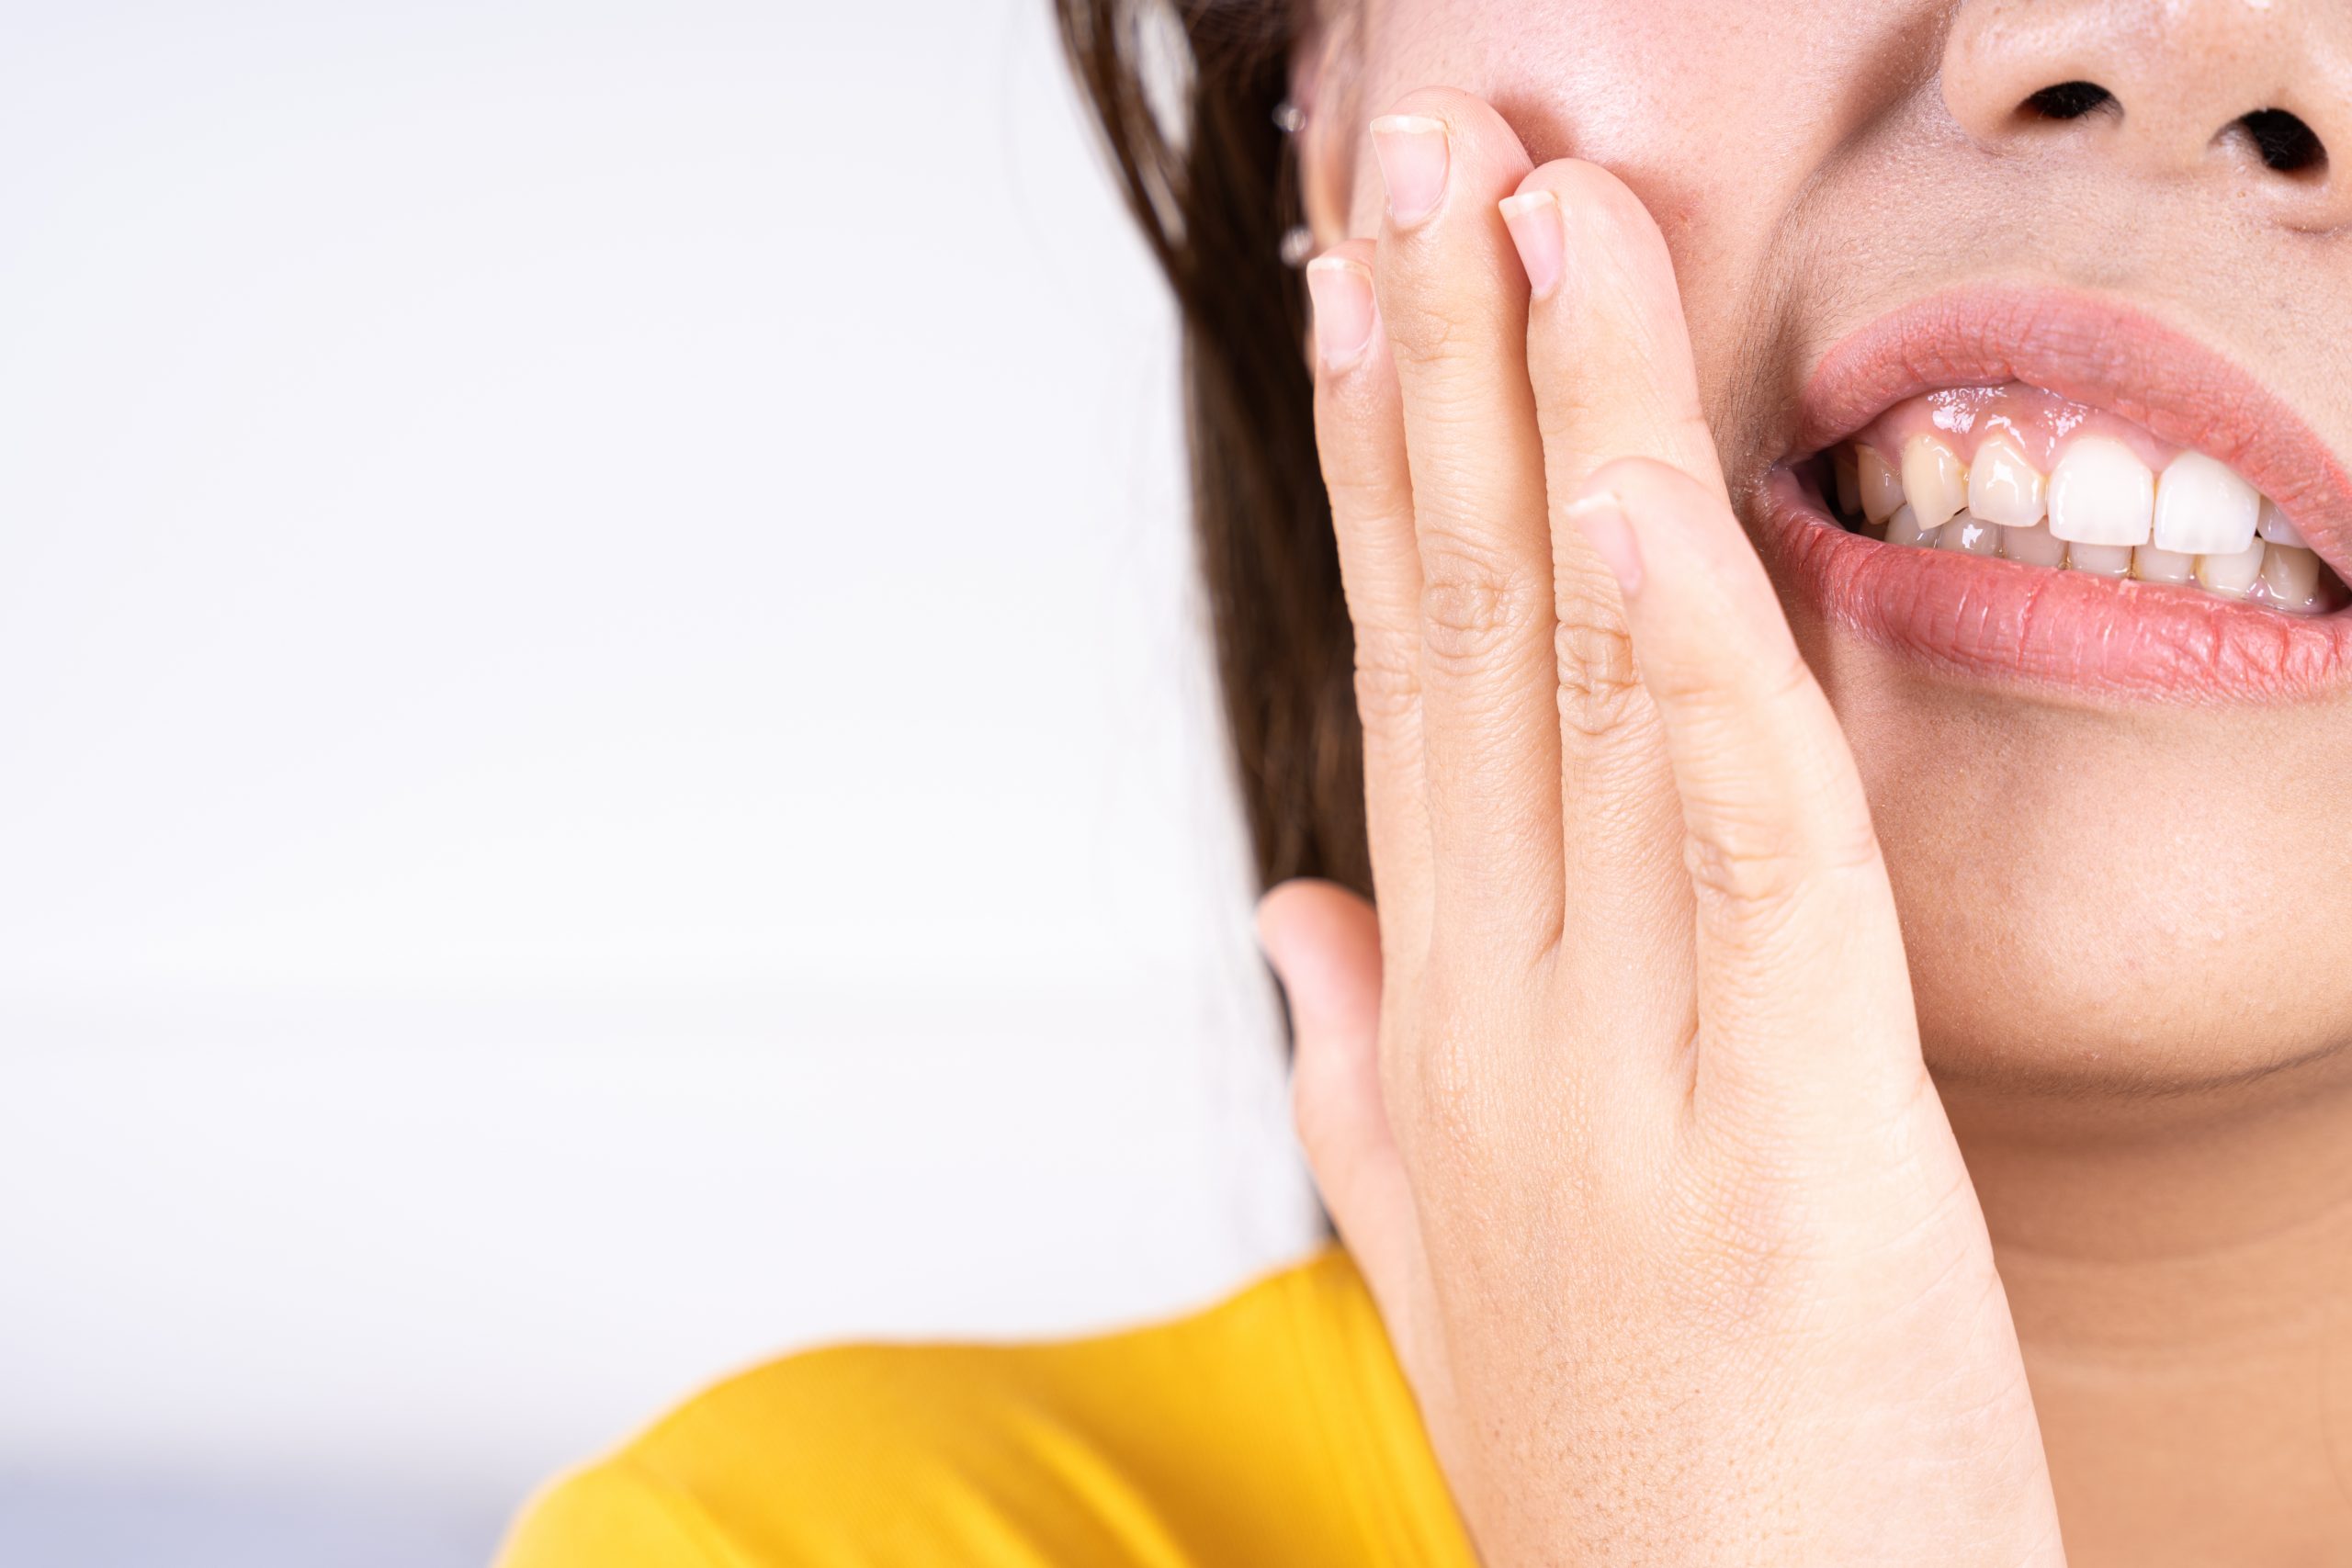 How To Care for Your Mouth After Wisdom Teeth Removal